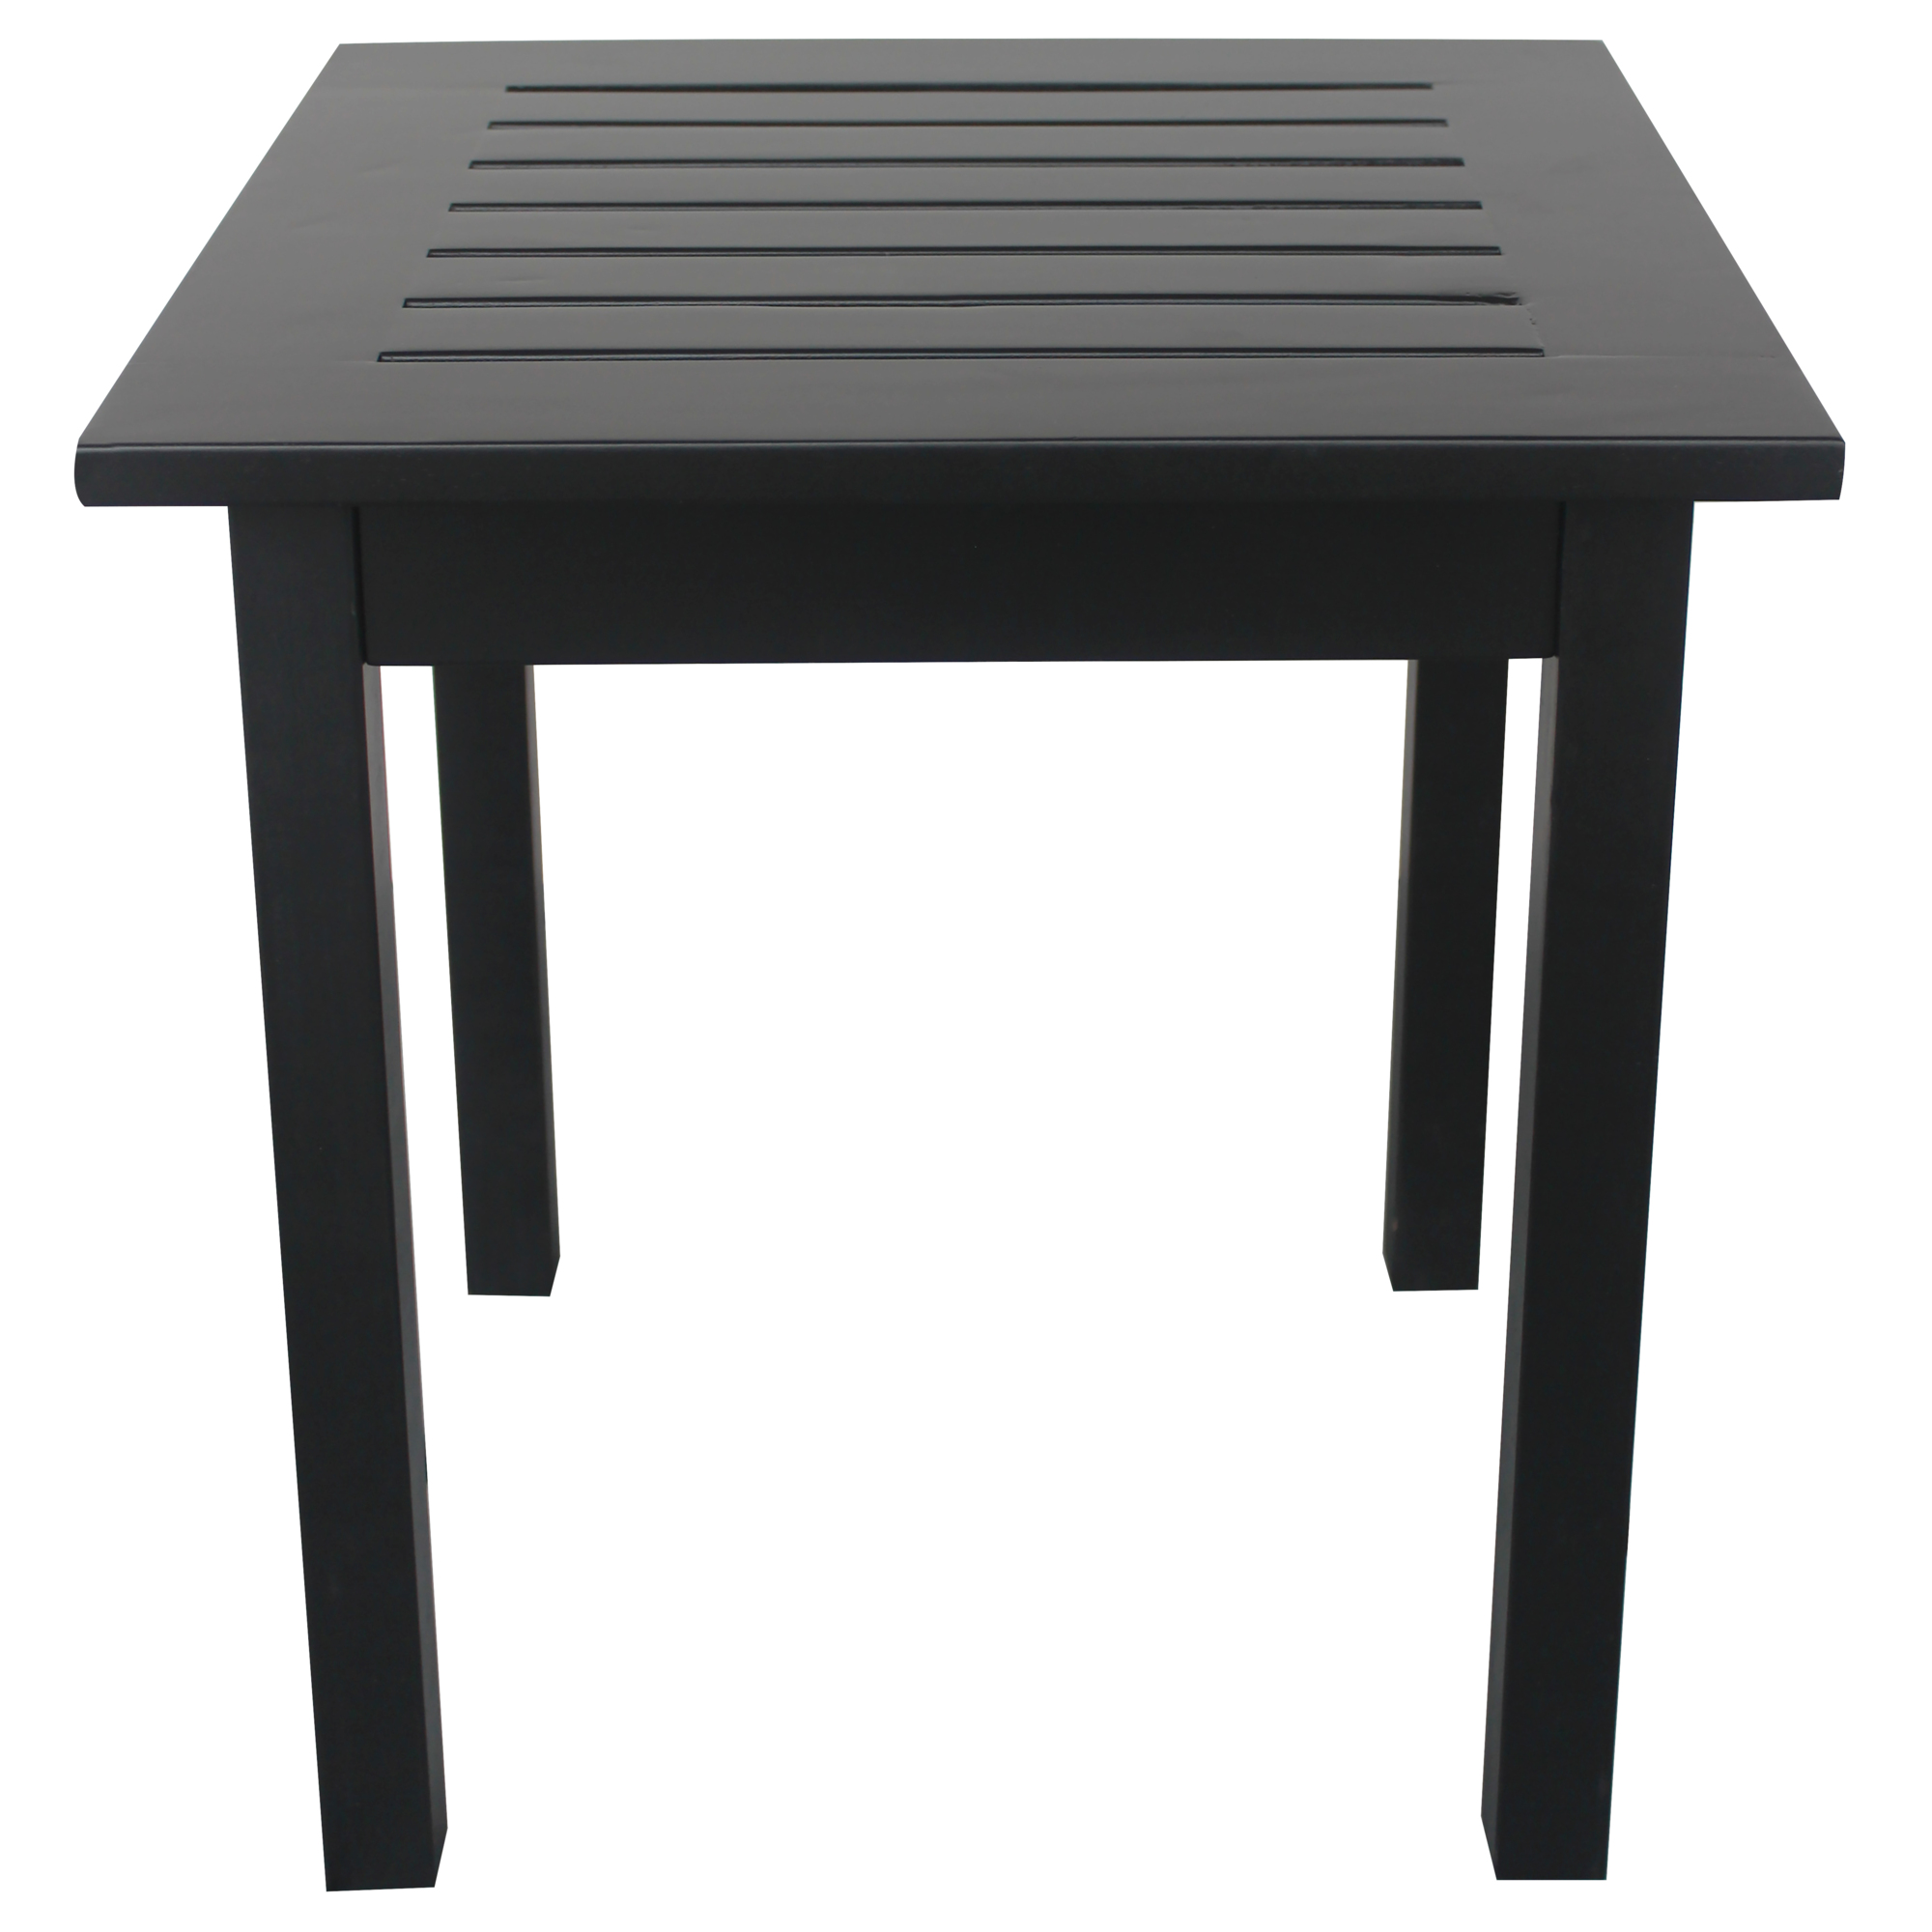 Leigh Country, Heartland TX 85,182 Black End Table, Table Shape Square, Primary Color Black, Height 19 in, Model TX 85182